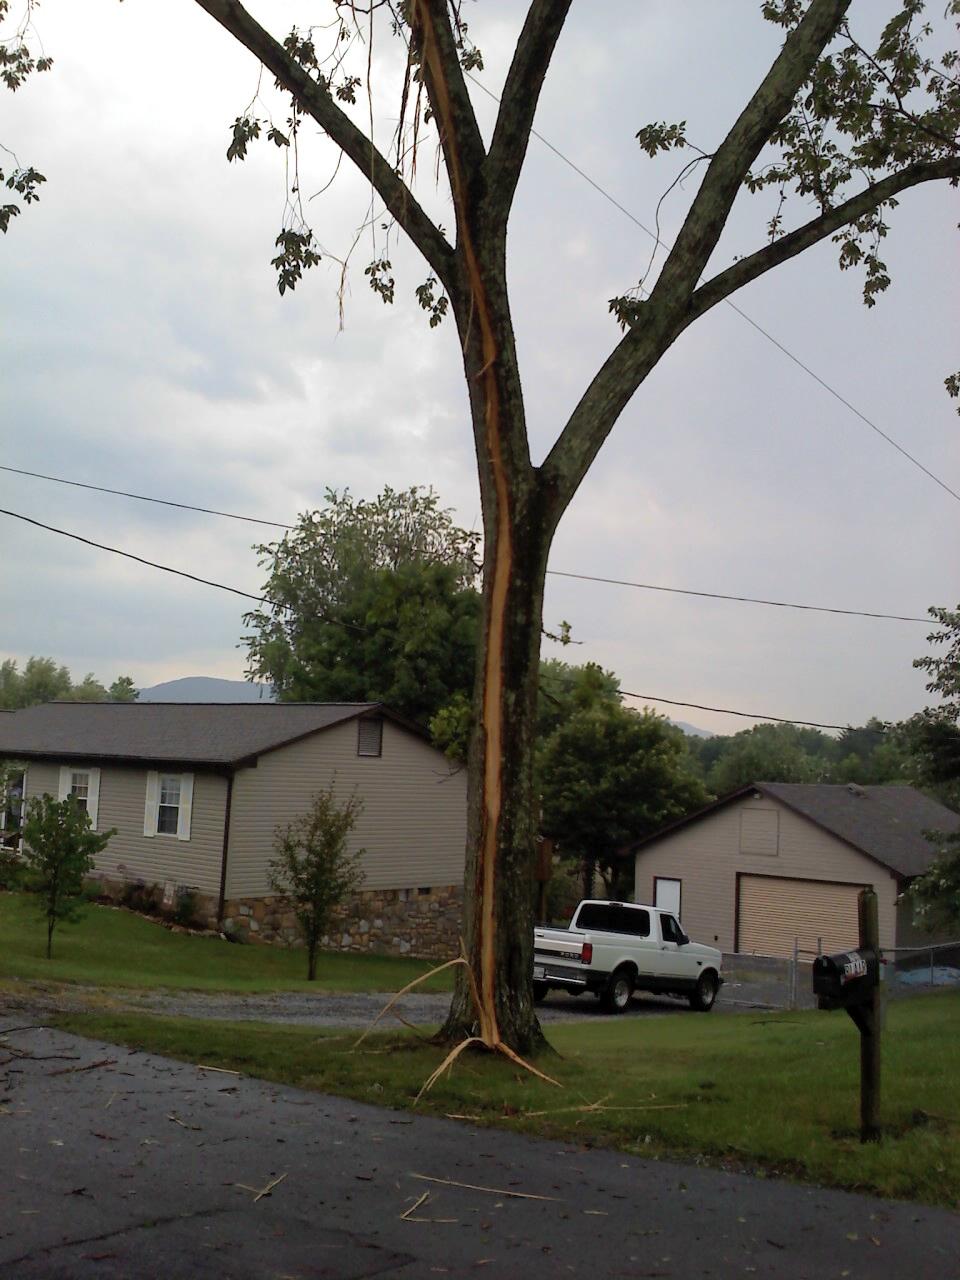 Heard a loud "boom" during a recent storm, went out afterward and discovered this in my neighbor's yard.